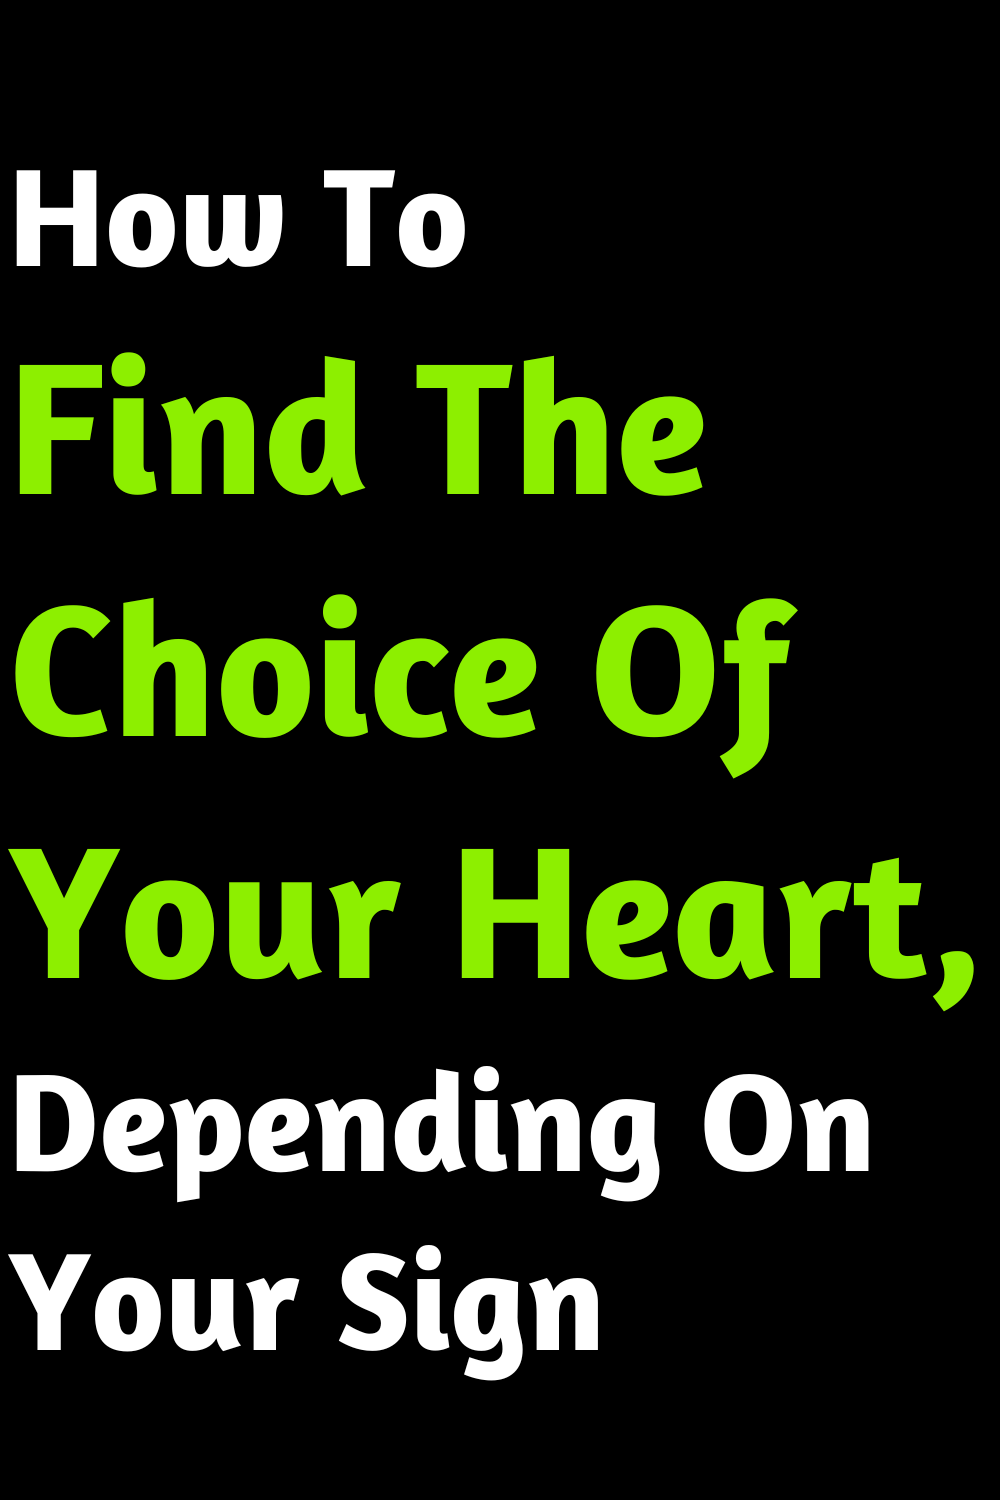 How To Find The Choice Of Your Heart, Depending On Your Sign